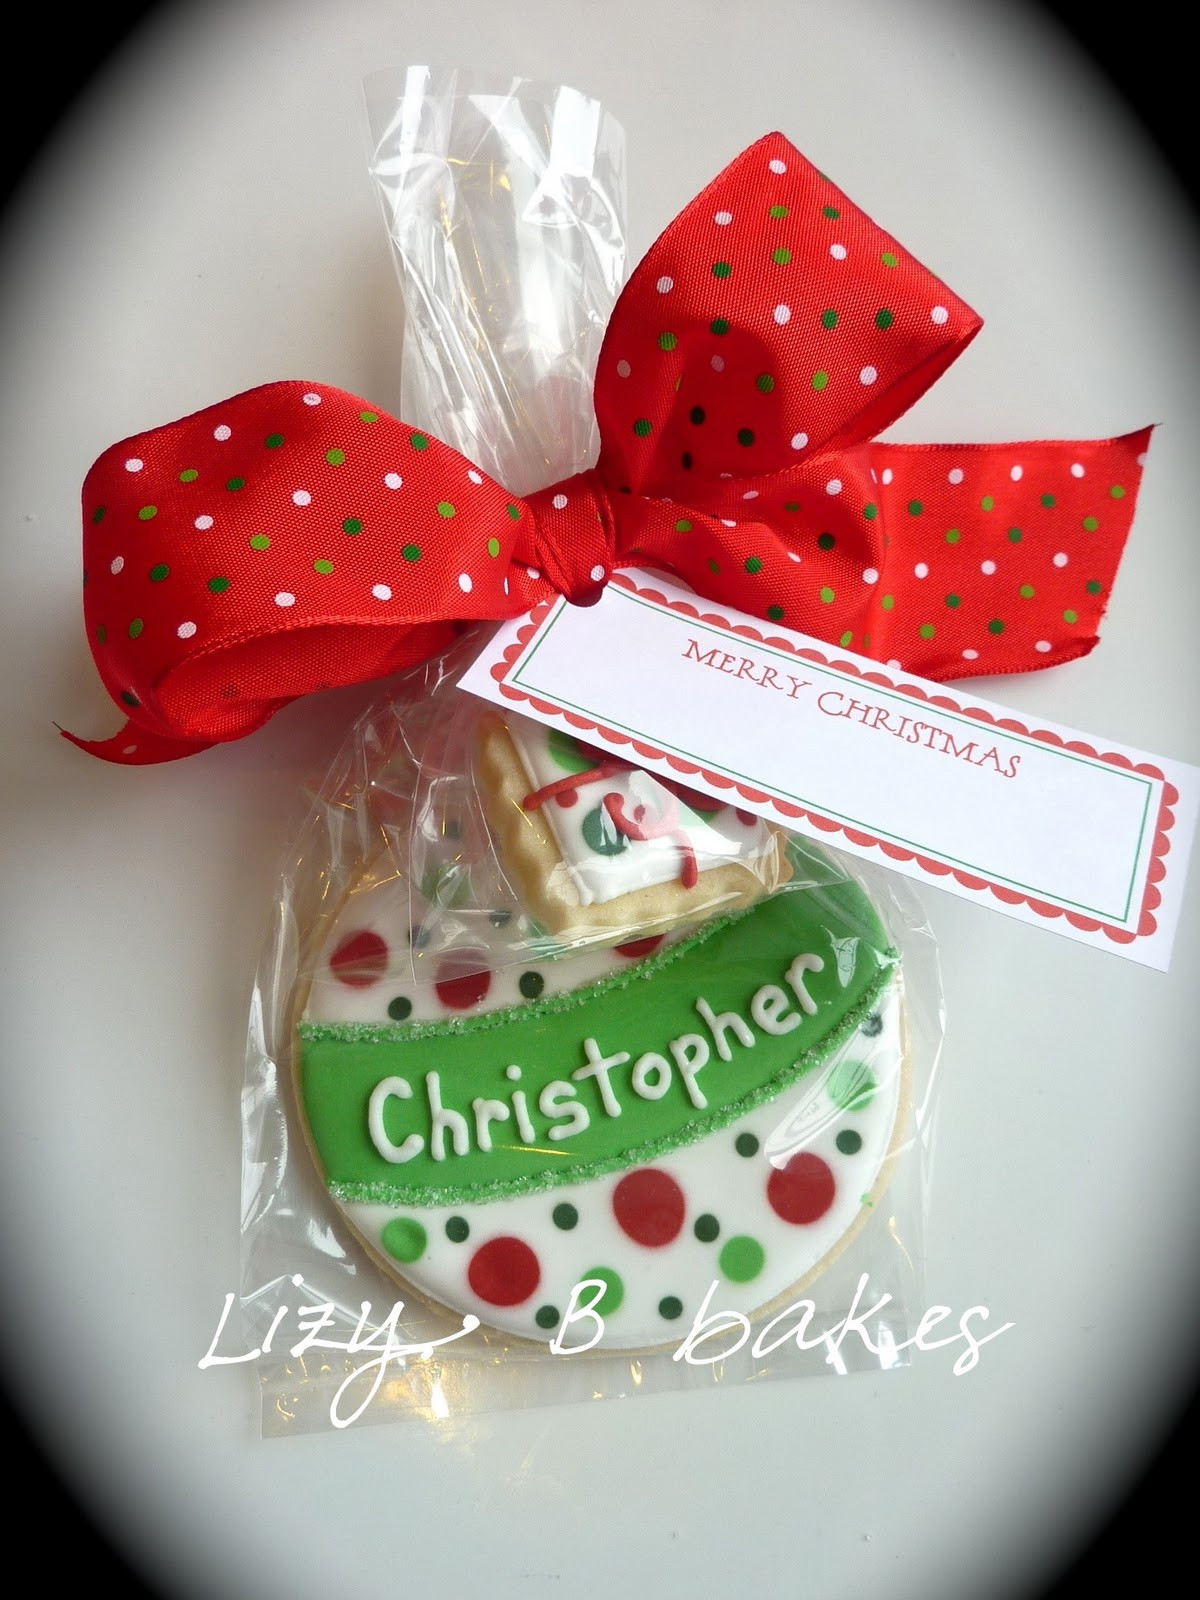 Special Christmas Cookies
 Lizy B Personalized Christmas Cookies